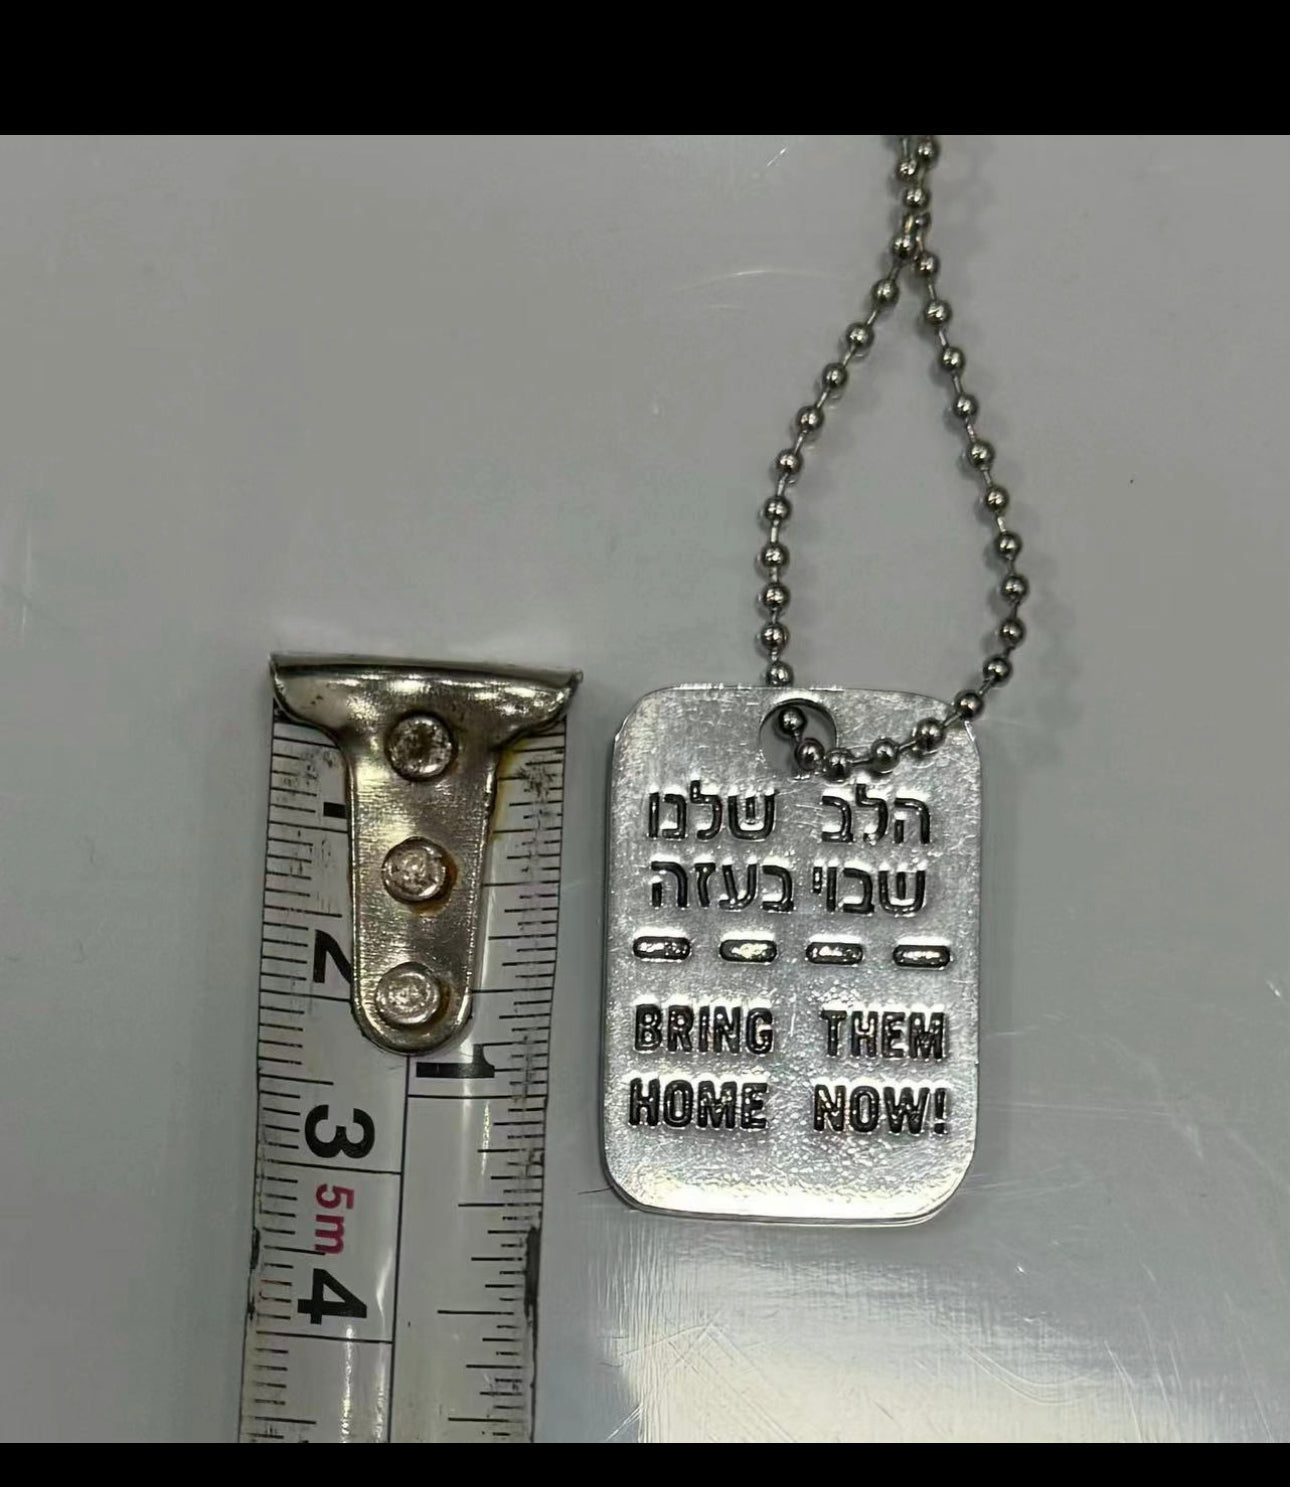 5 pack  Bring Them Home Now Two Sides Tag Necklace Jewelry Unisex Chain  show Support of Israel  Israel Dog Tag hand made in Israel  Small size  15% off today